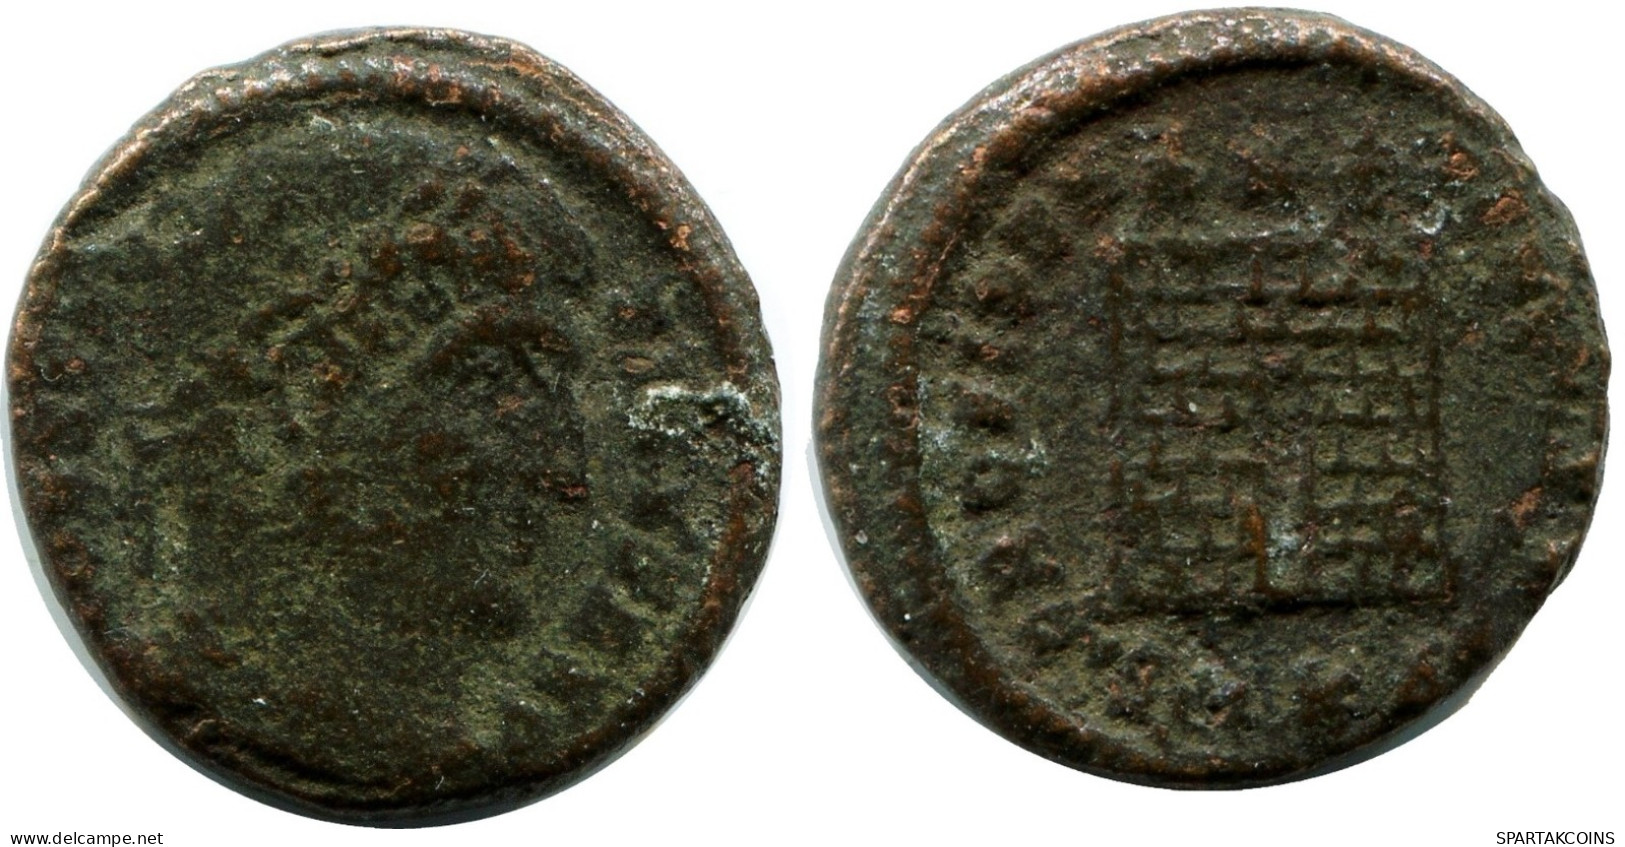 CONSTANTINE I MINTED IN CYZICUS FROM THE ROYAL ONTARIO MUSEUM #ANC11002.14.E.A - The Christian Empire (307 AD Tot 363 AD)